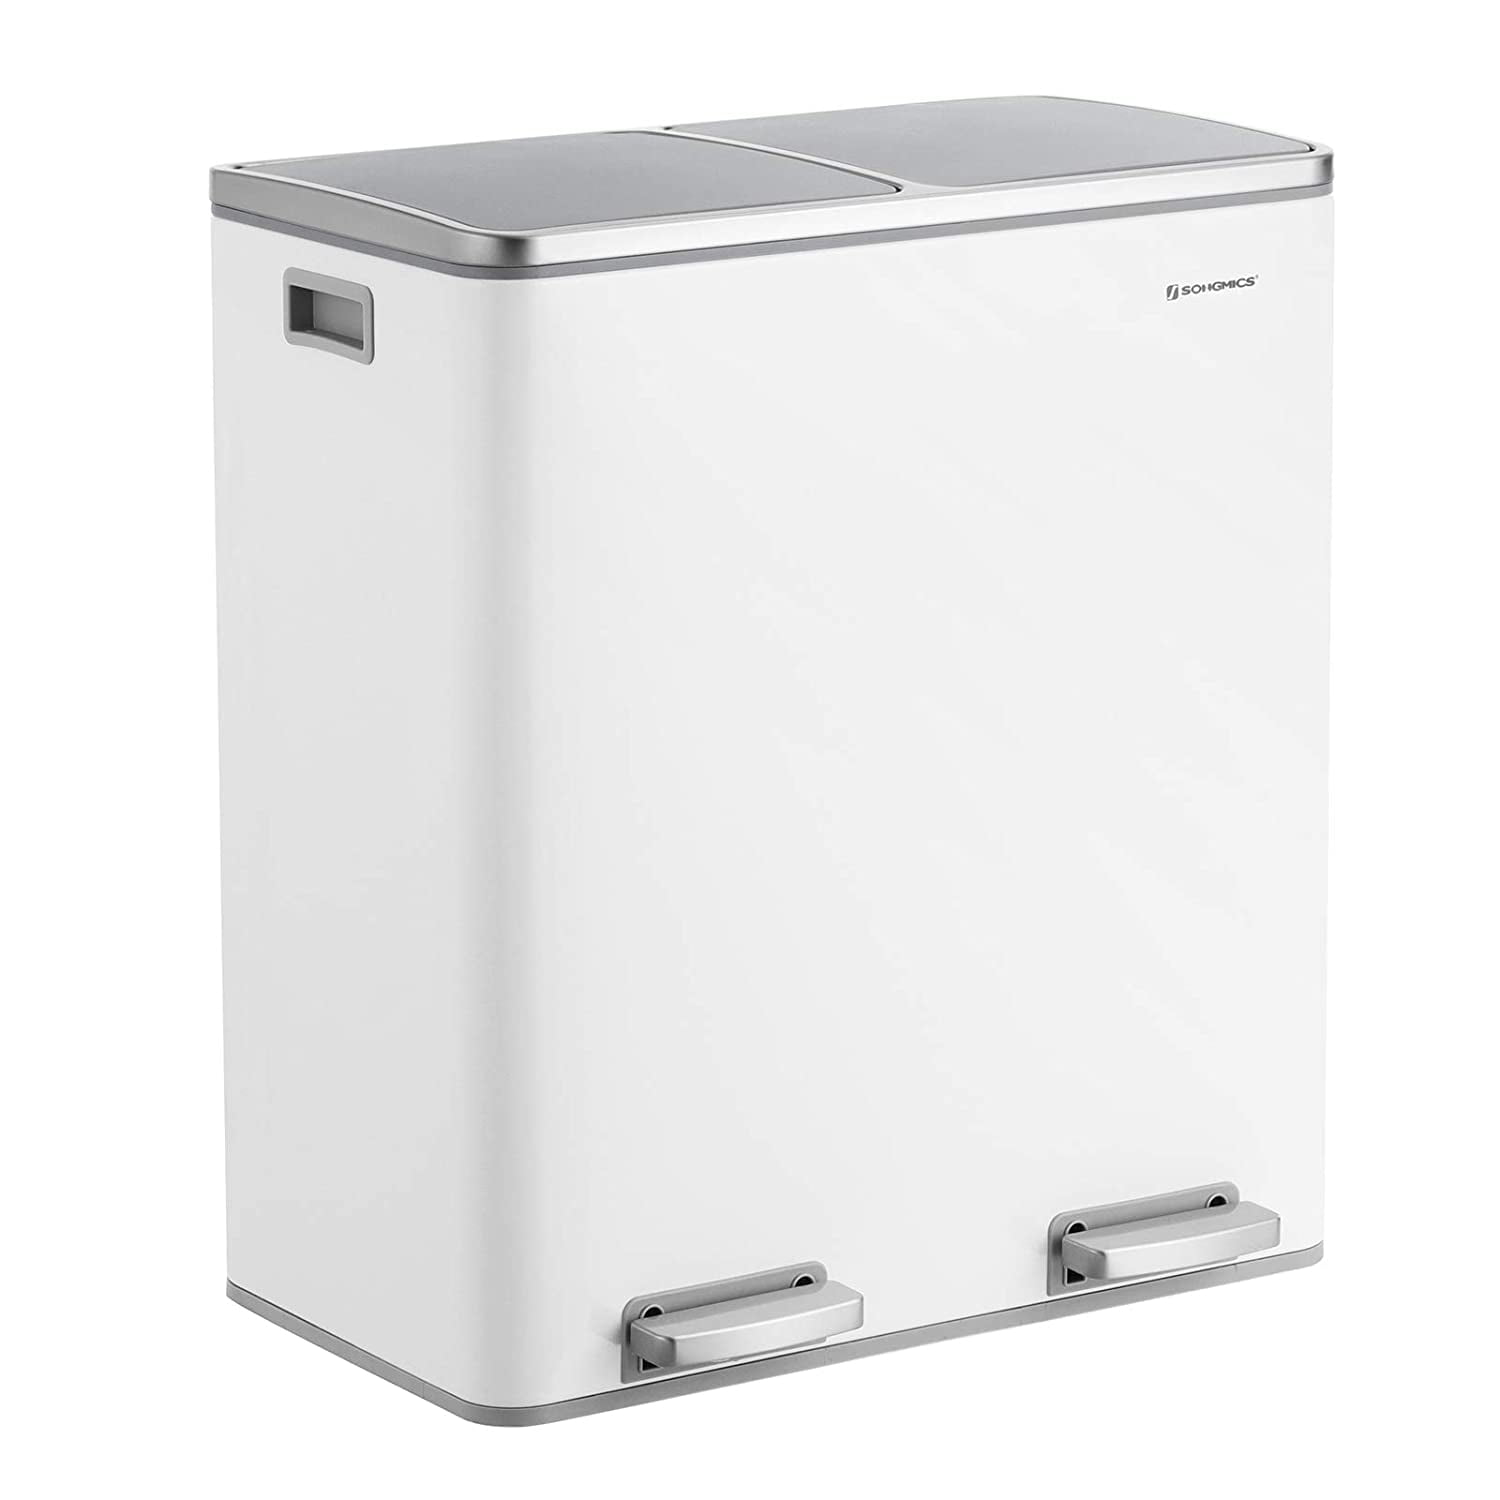 2 x 30L Recycling Bin Cloud White LTB060A01 Metal Pedal Bin Handles Airtight Plastic Inner Buckets and Hinged Lids Soft Closure SONGMICS Dual Rubbish Bin with Dual Compartments 